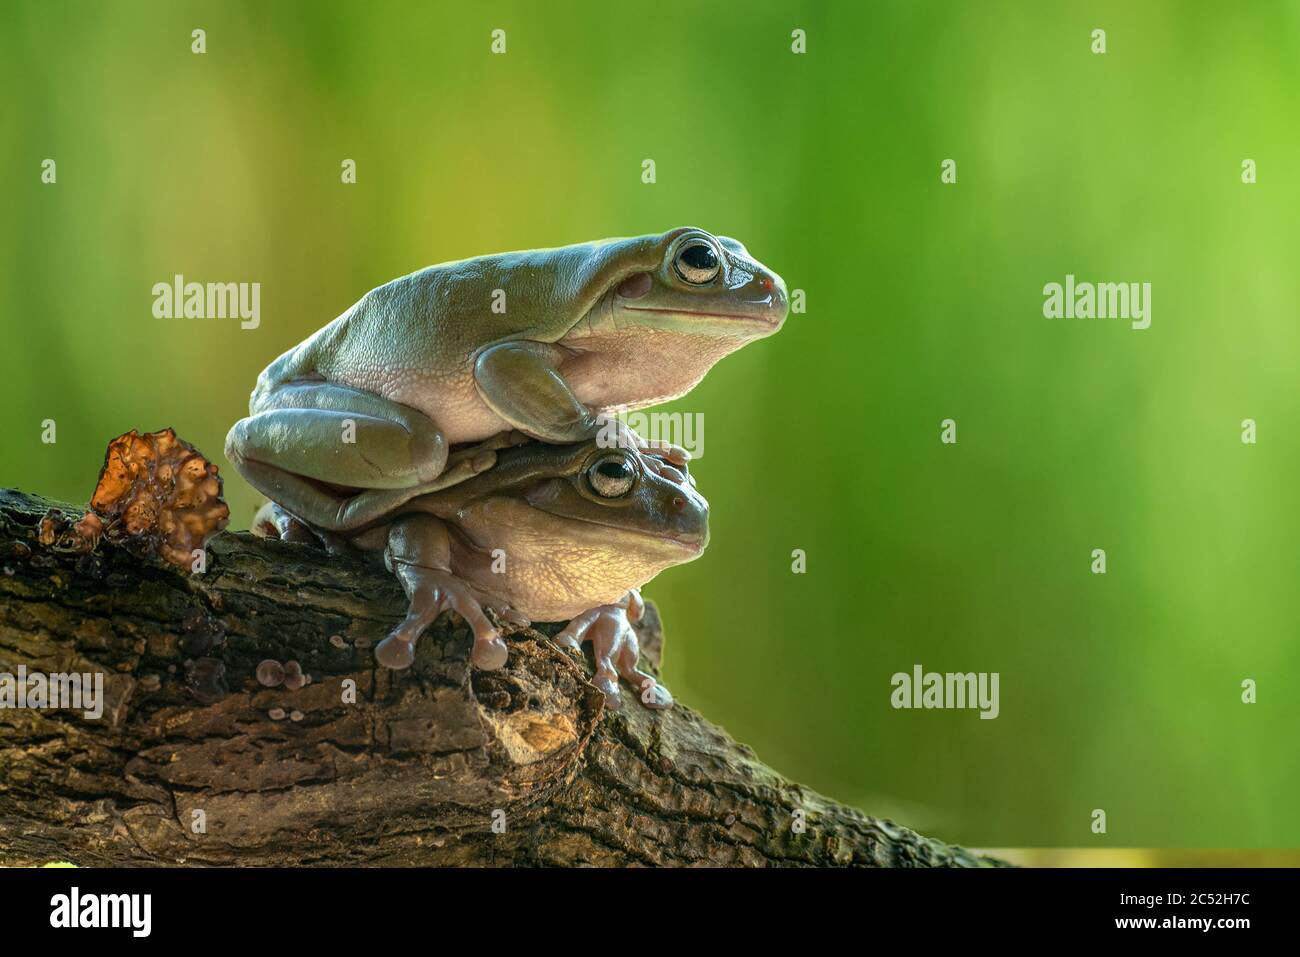 Two Australian green tree frogs on top of each other on a branch, Indonesia Stock Photo